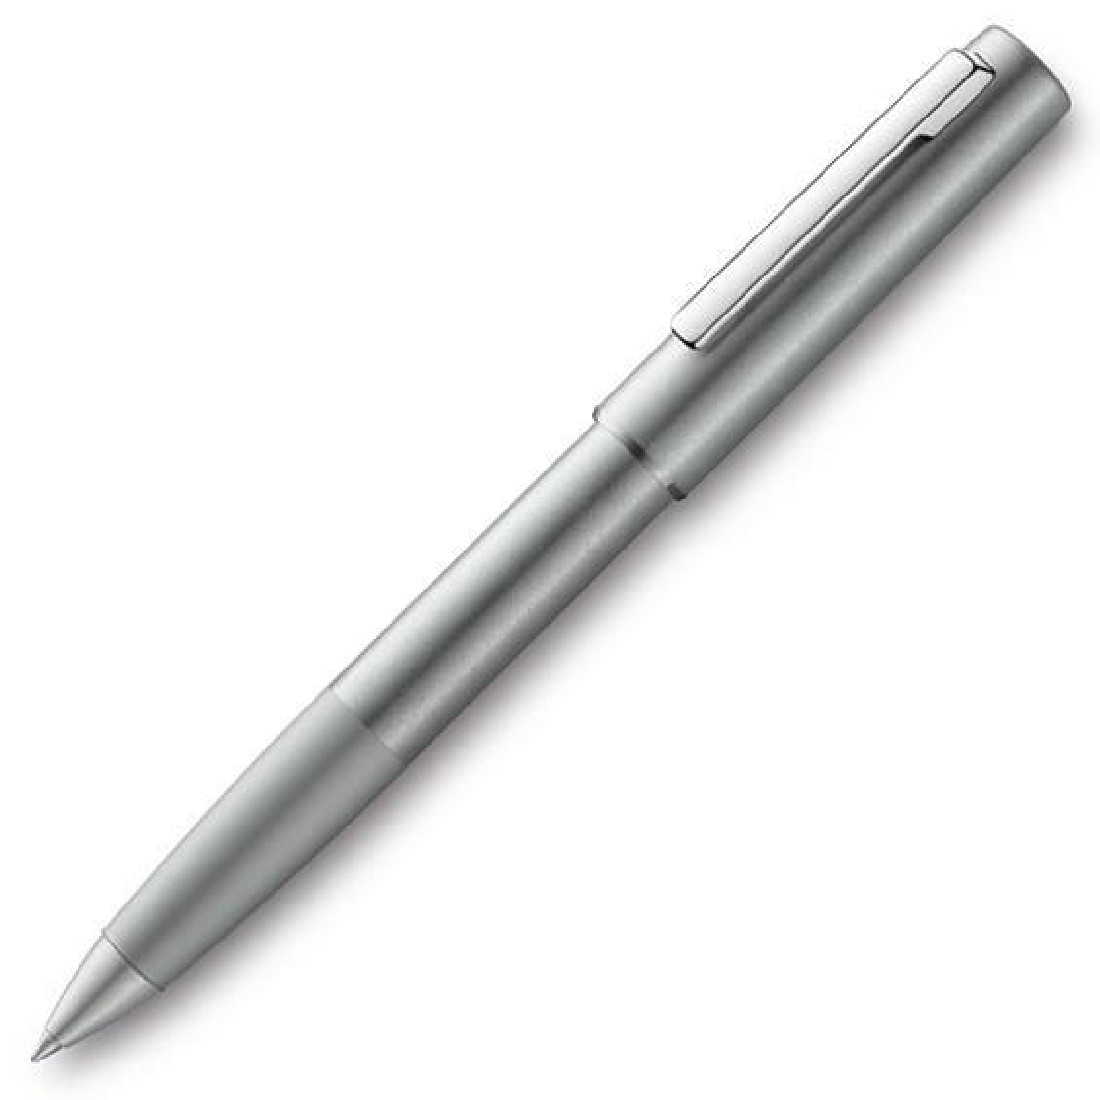 Lamy aion olivesilver Rollerball